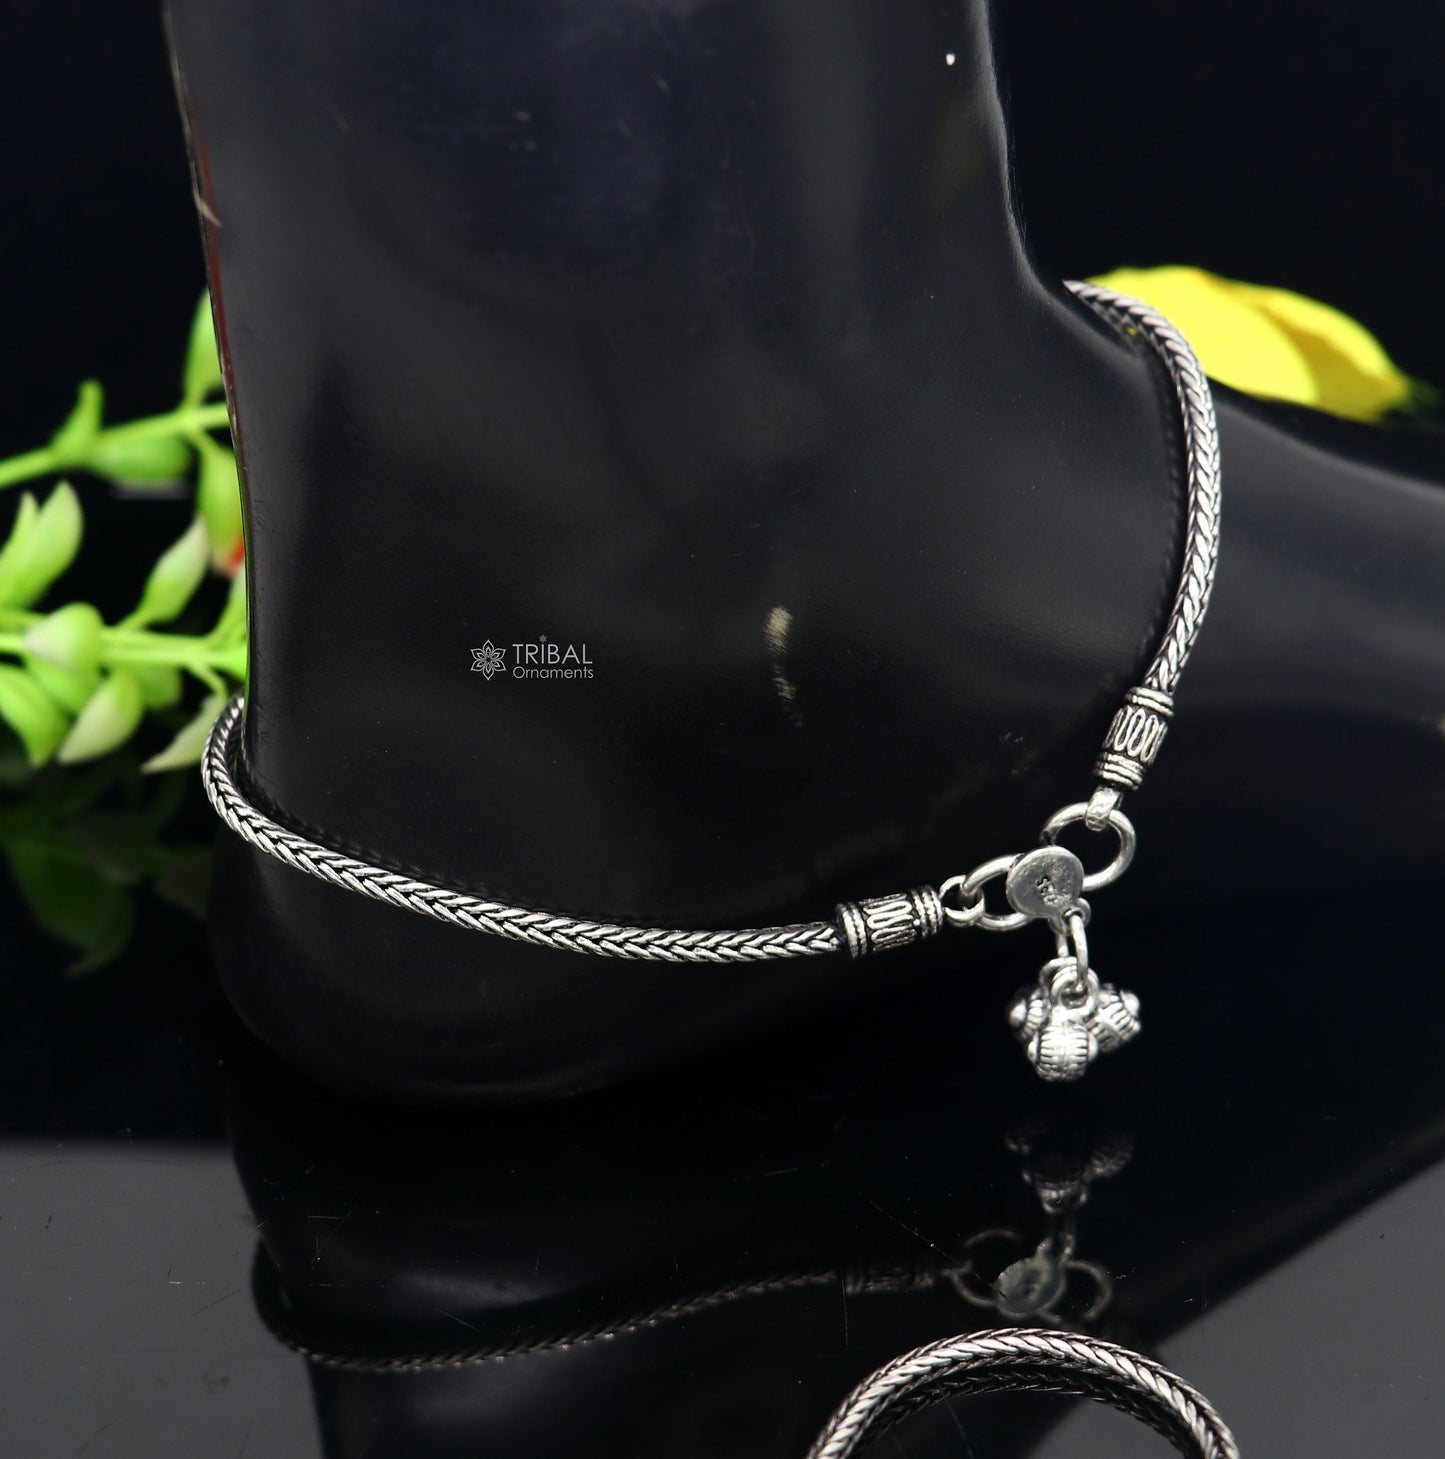 10.5" 925 solid silver handmade 2.5mm wheat chain ankle bracelet, vintage style charm anklets, tribal belly dance jewelry ank587 - TRIBAL ORNAMENTS